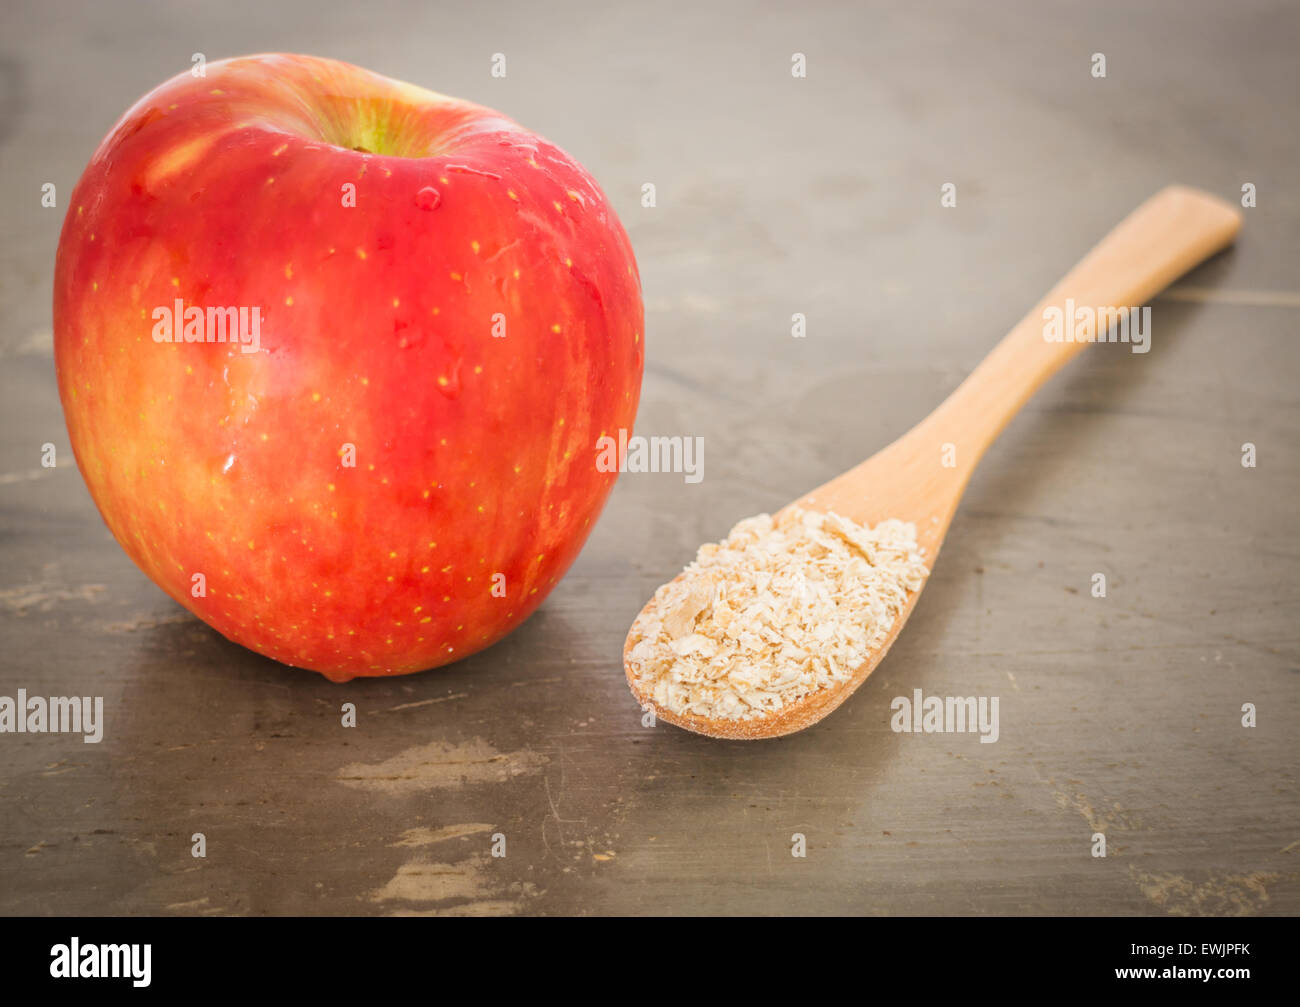 Red apple on the table, stock photo Stock Photo